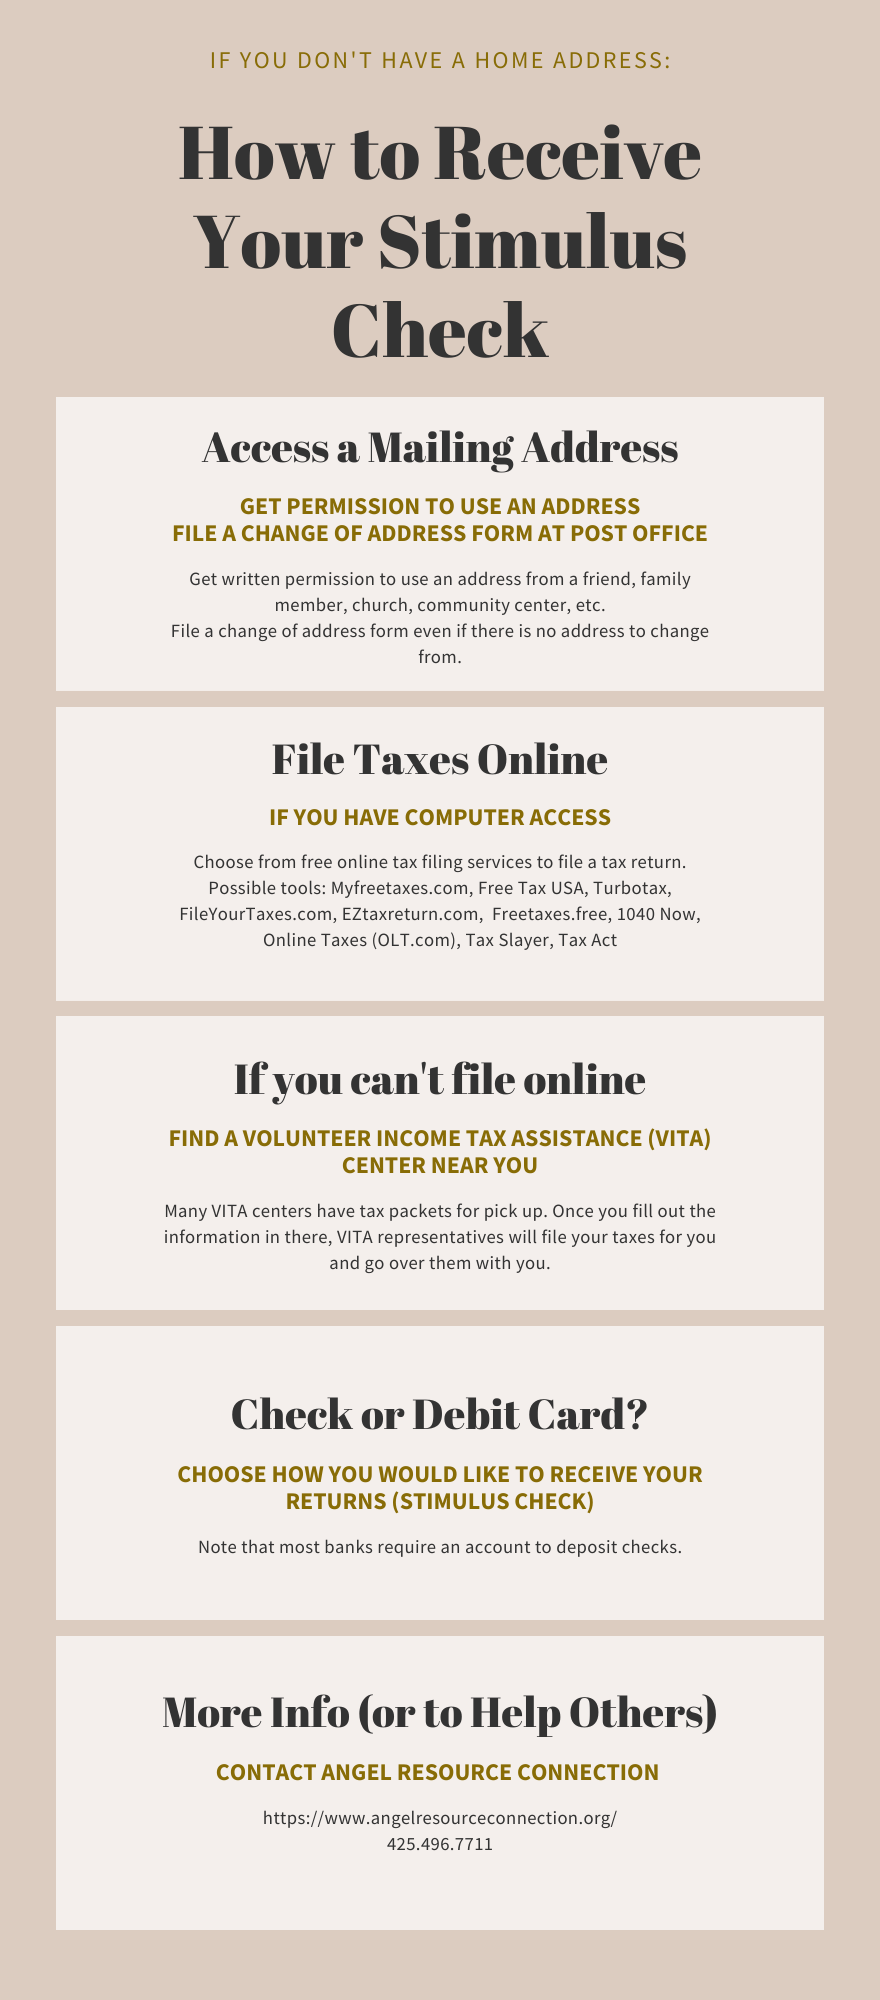 Infographic: How to Receive a Stimulus Check When Lacking a Home Address